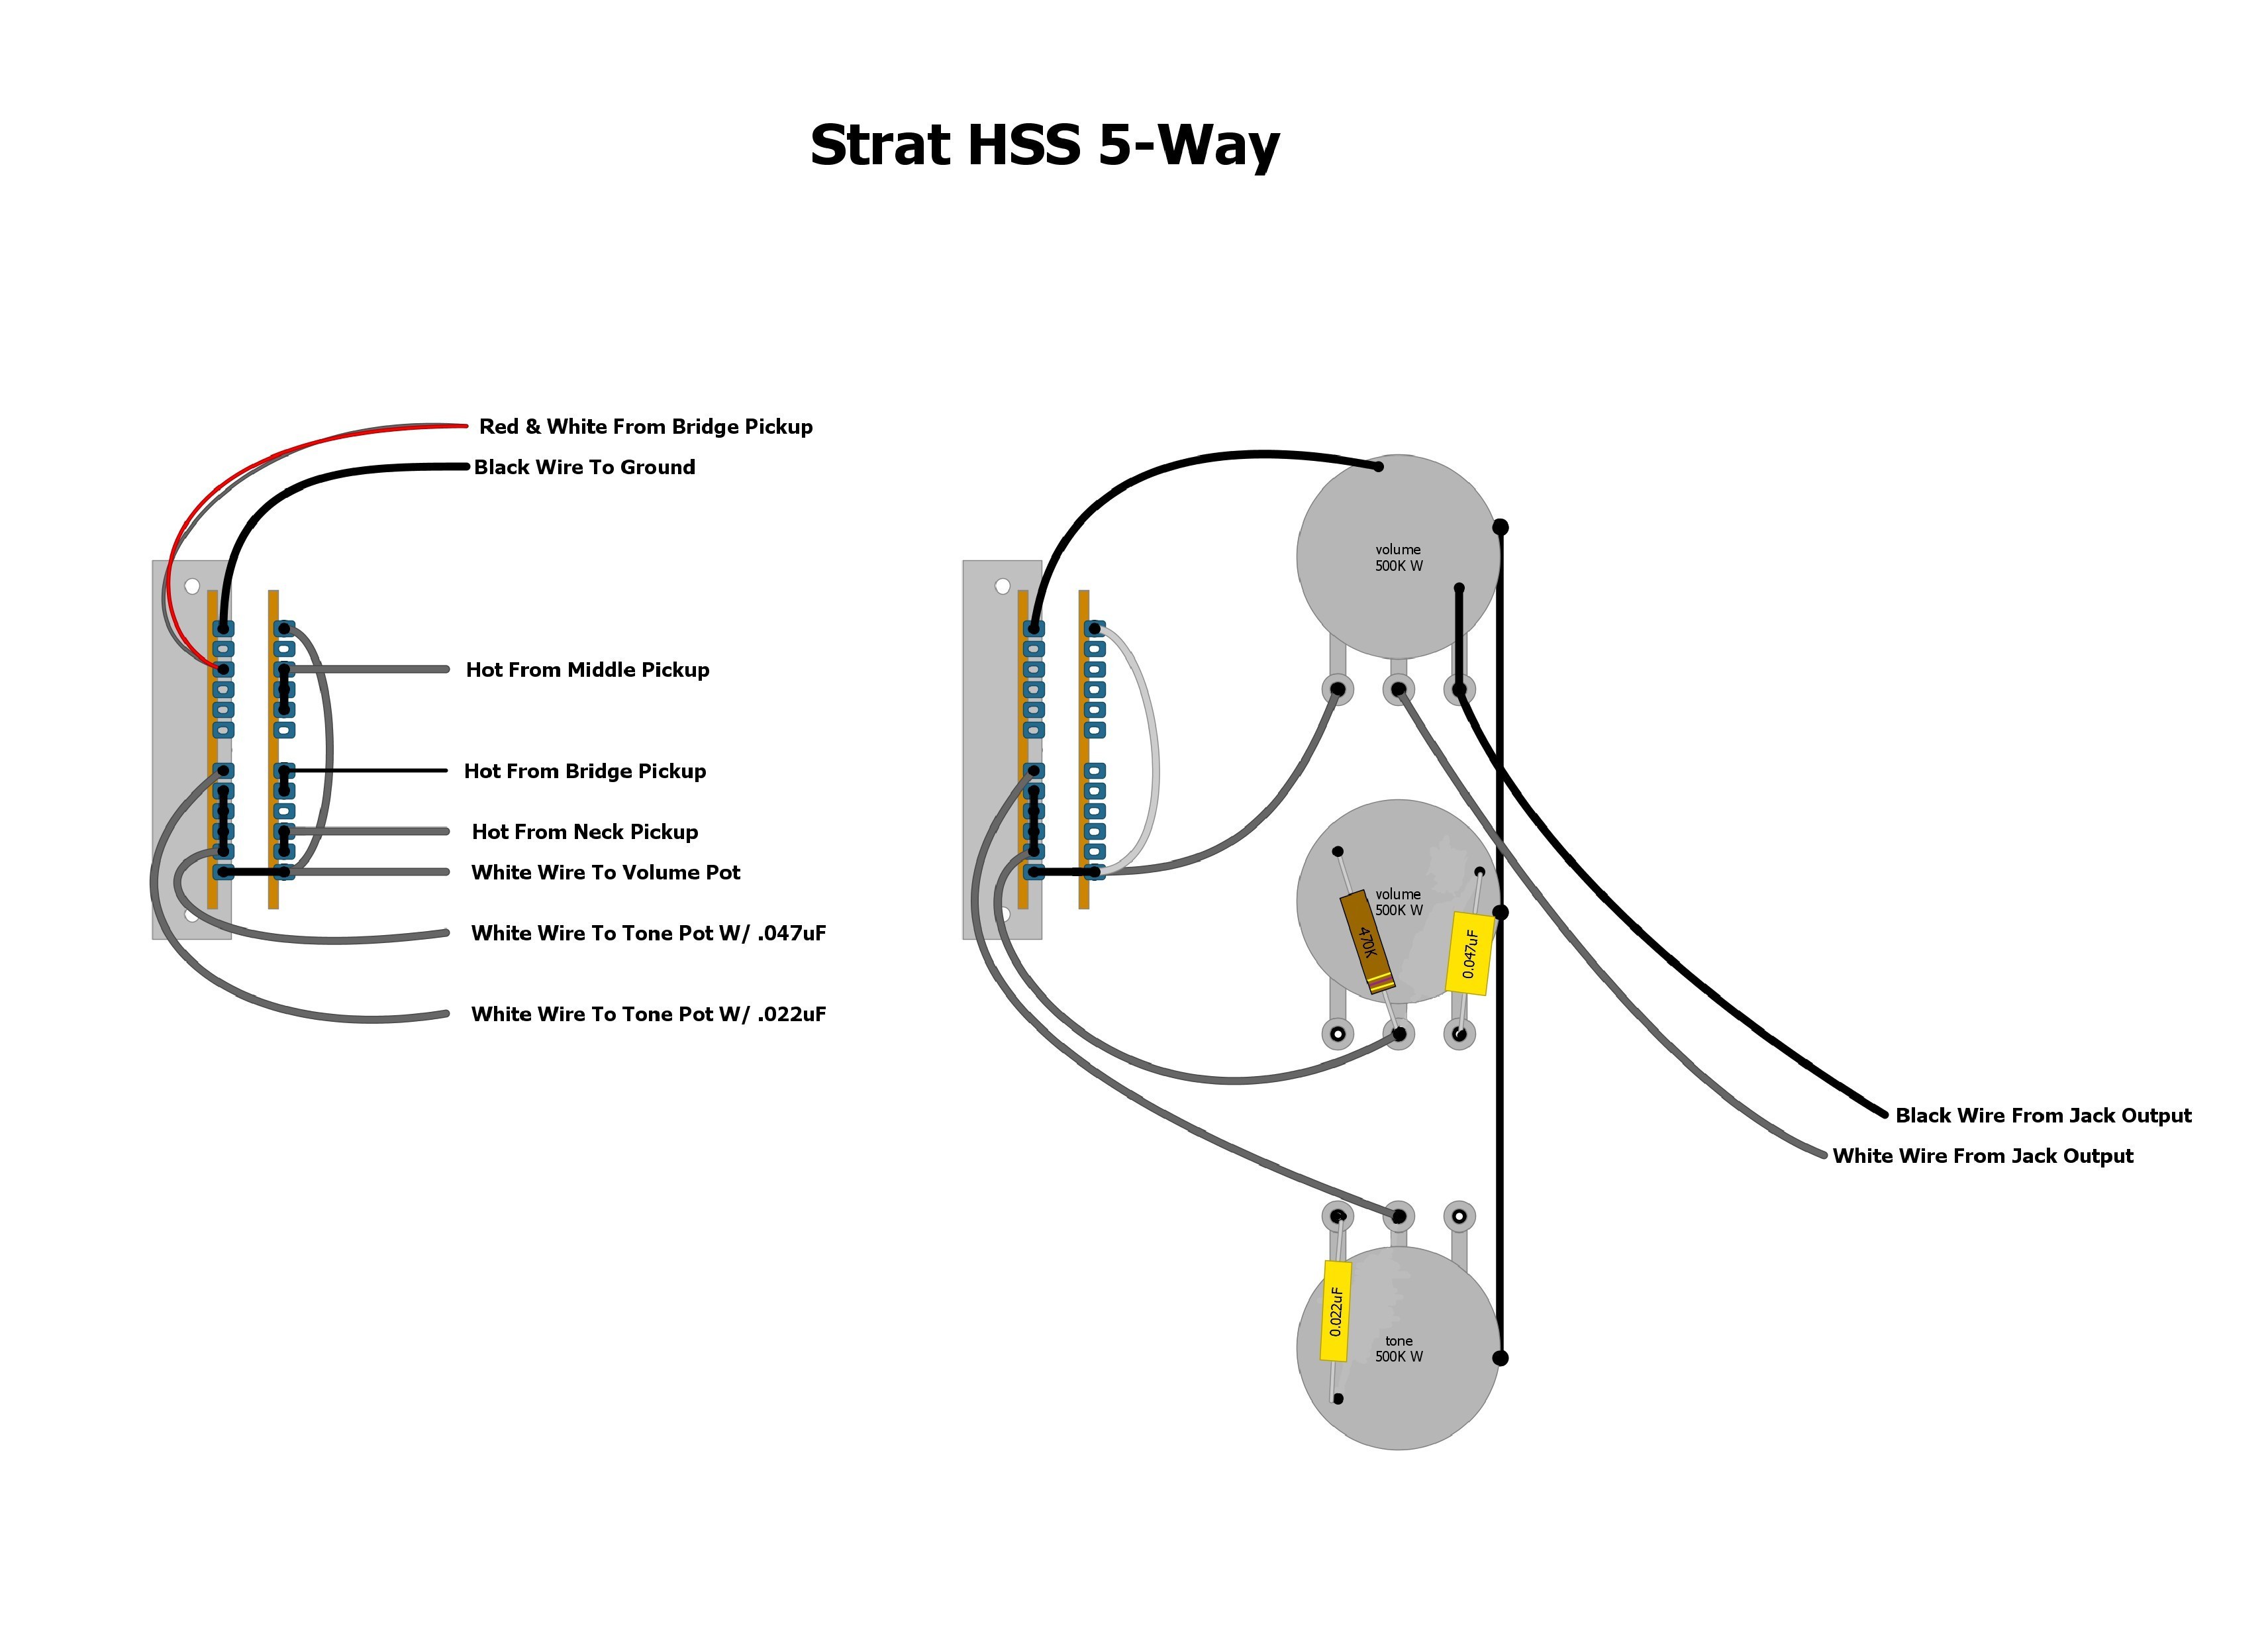 Wiring Diagram for Prs Guitars Best Wiring Diagram for A Guitar Fresh Guitar Pickups Stratocaster Wiring